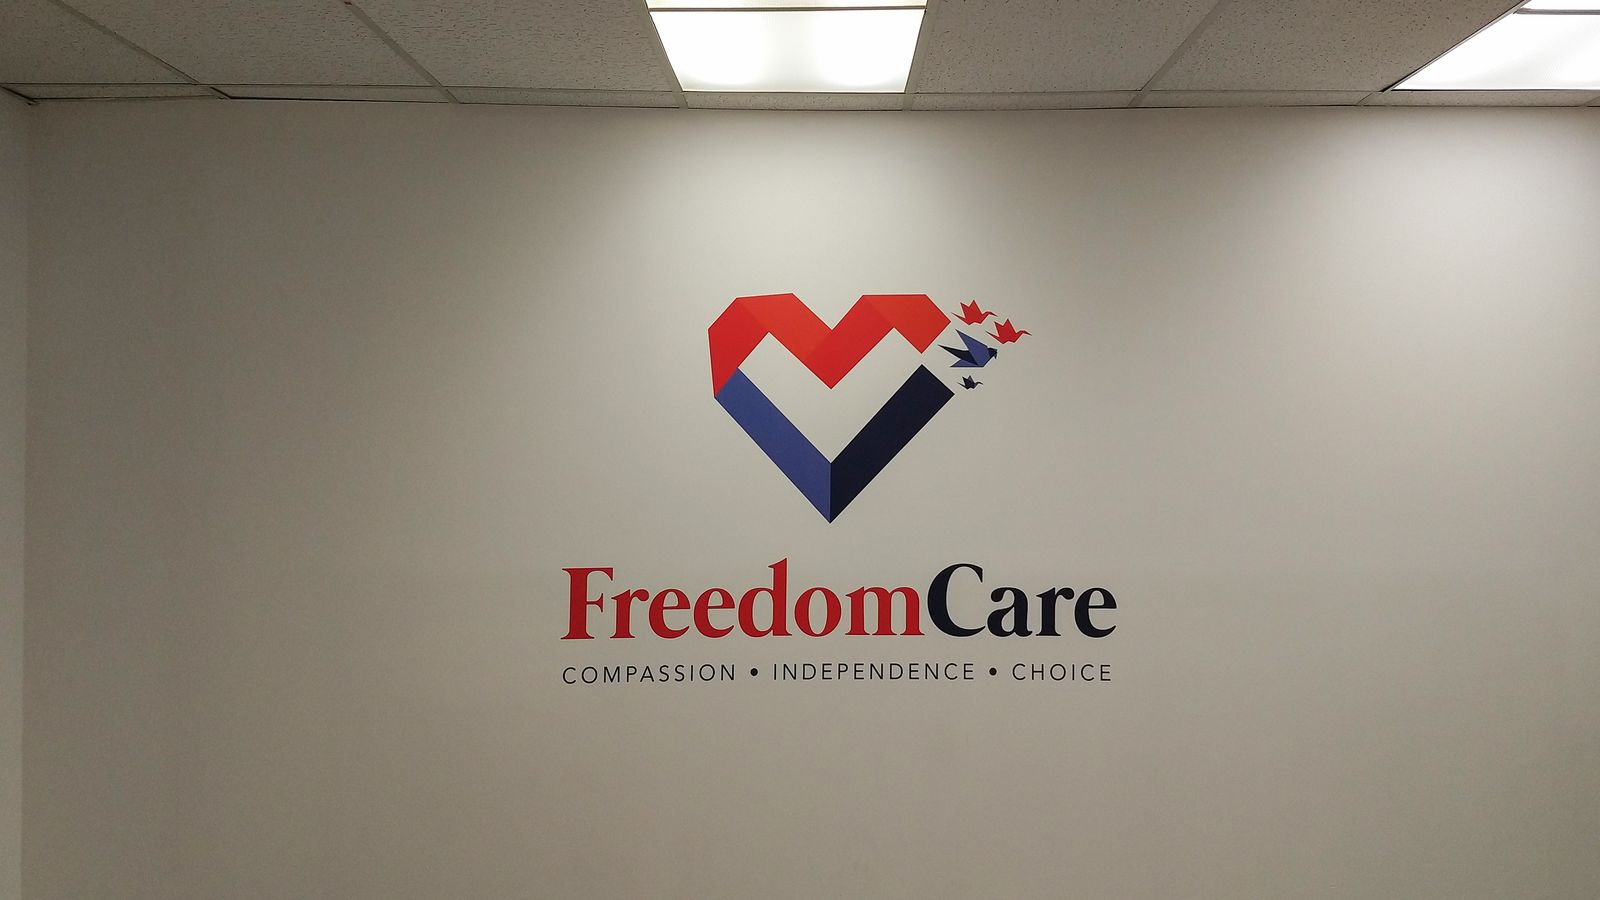 freedom care wall decal